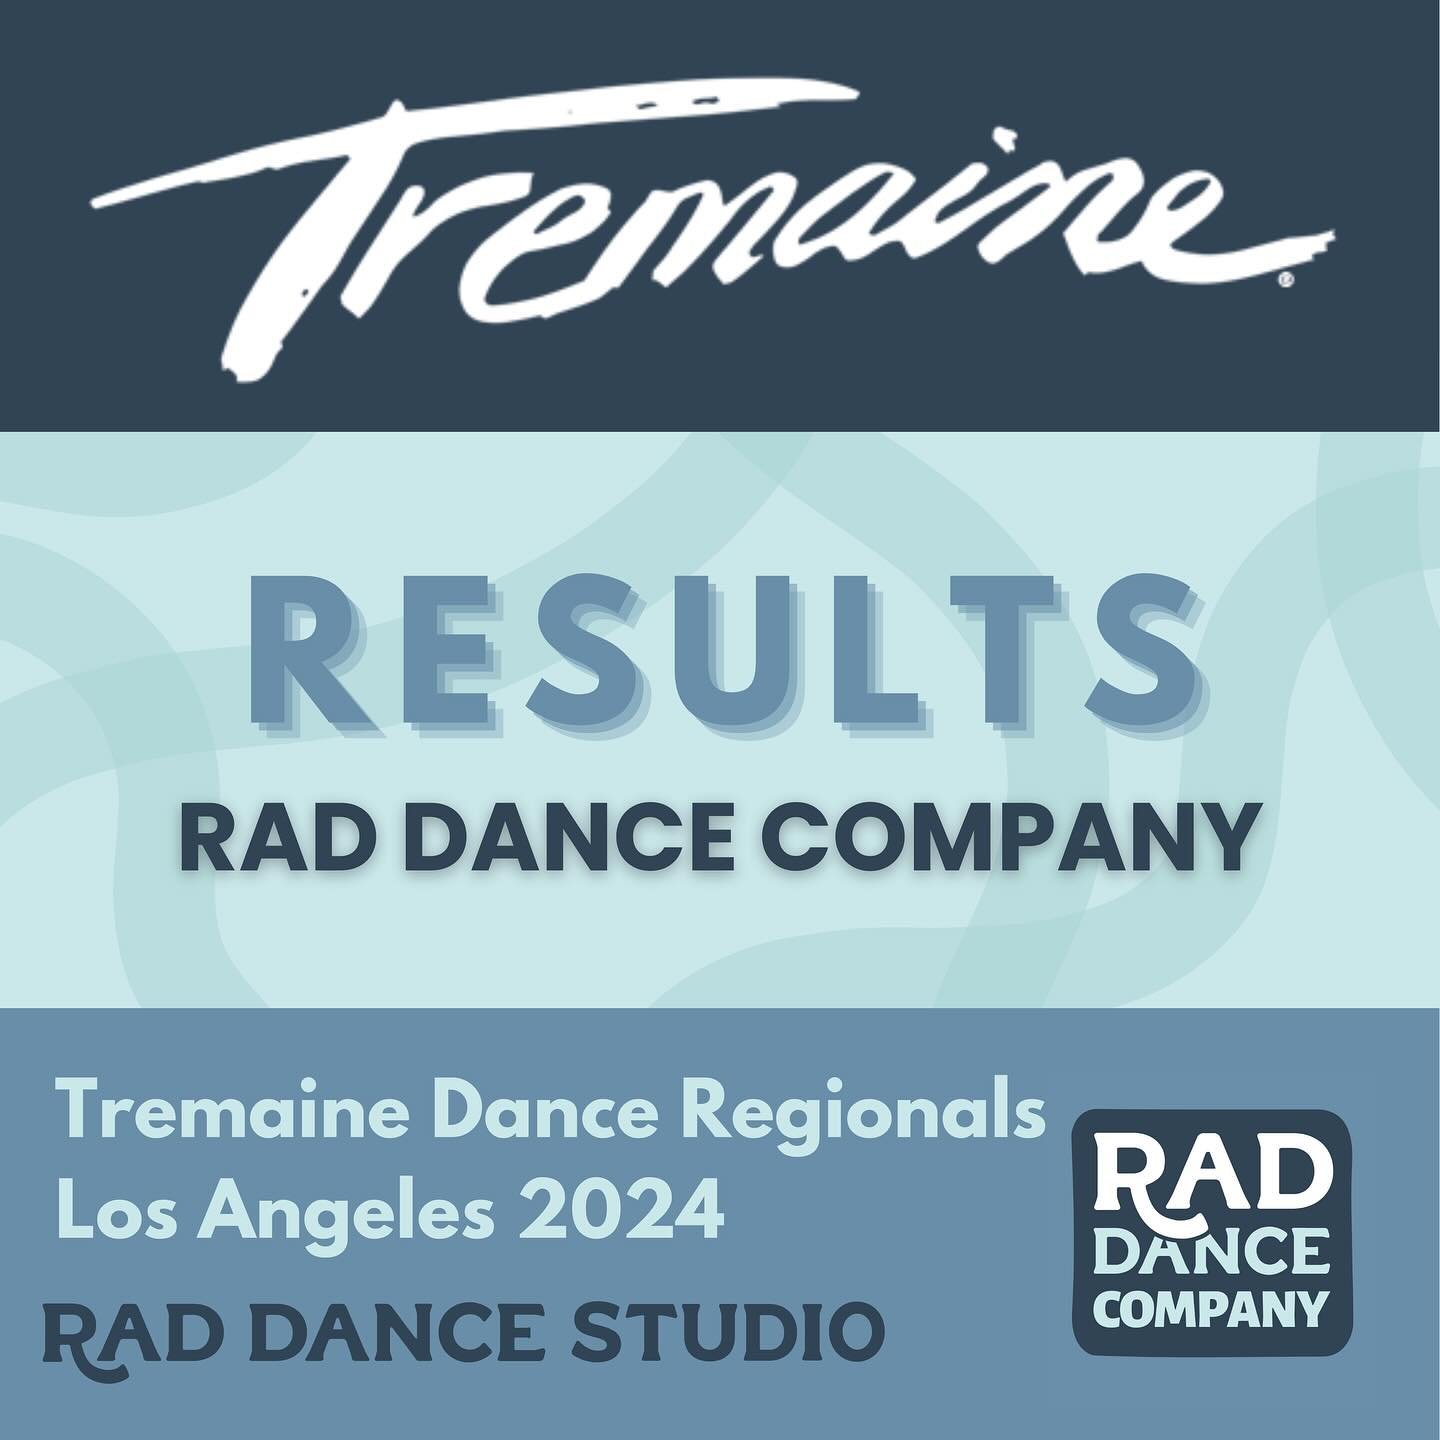 🚨 RESULTS ARE IN

😍 Our RDC dancers did INCREDIBLE last weekend for their final regional competition of the season at @tremainedance in Los Angeles! A HUGE thank you to all at Tremaine Dance for a fabulous weekend! 

👏 Congratulations on so many a